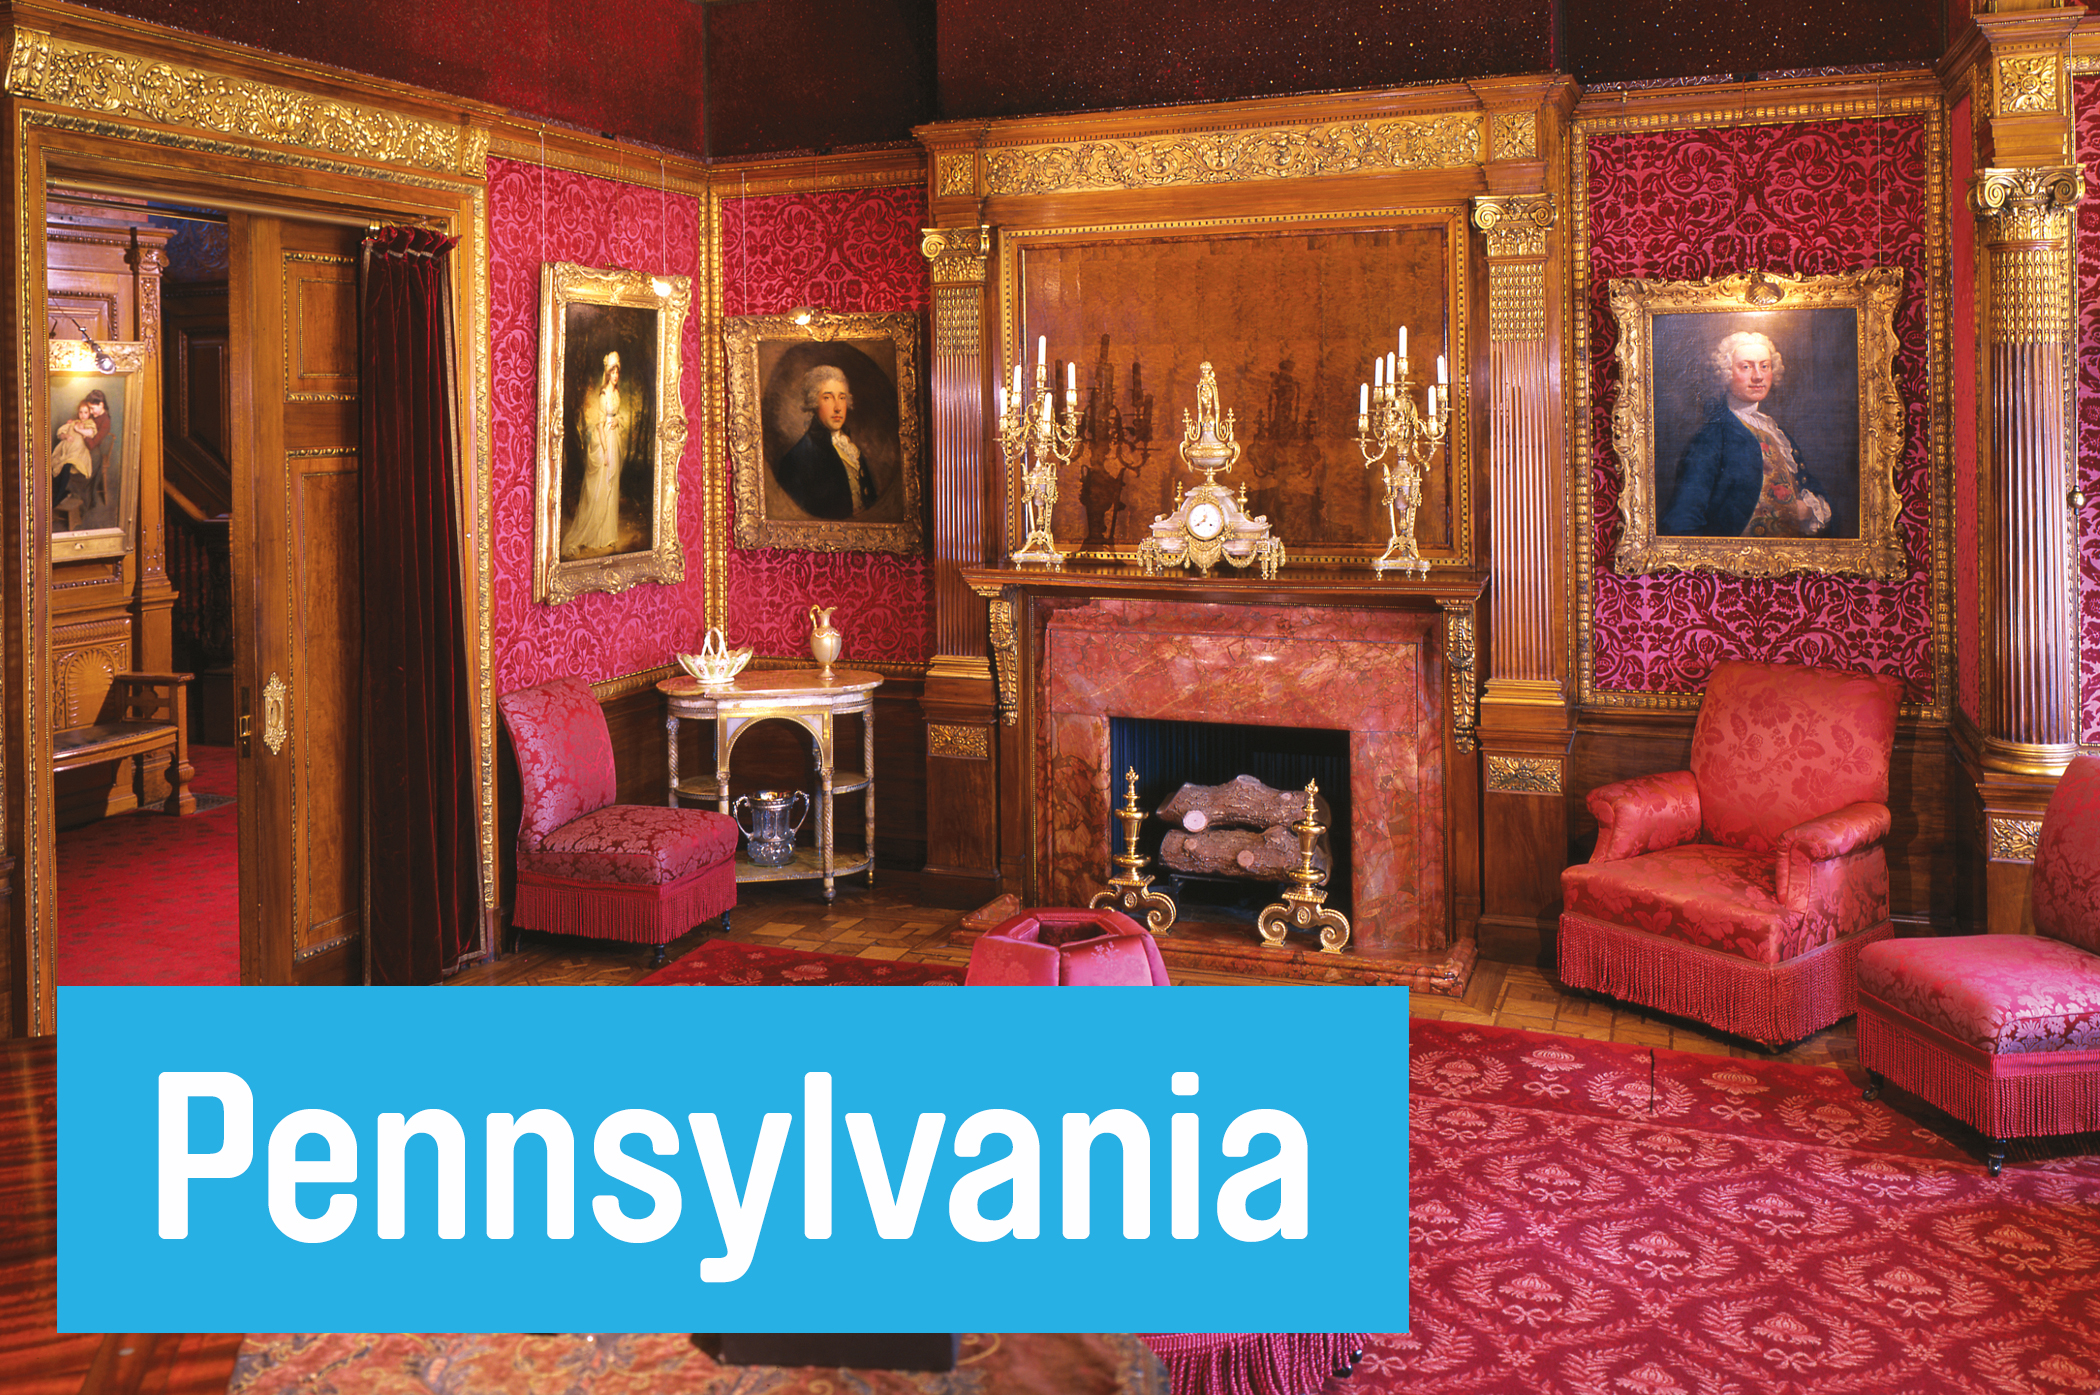 See how the other 1% lived at the <a href="http://www.thefrickpittsburgh.org/" target="_blank">Frick Art &amp; Historical Center</a>, which includes 2,000 artifacts from industrialist Henry Clay Frick’s gilded age life.